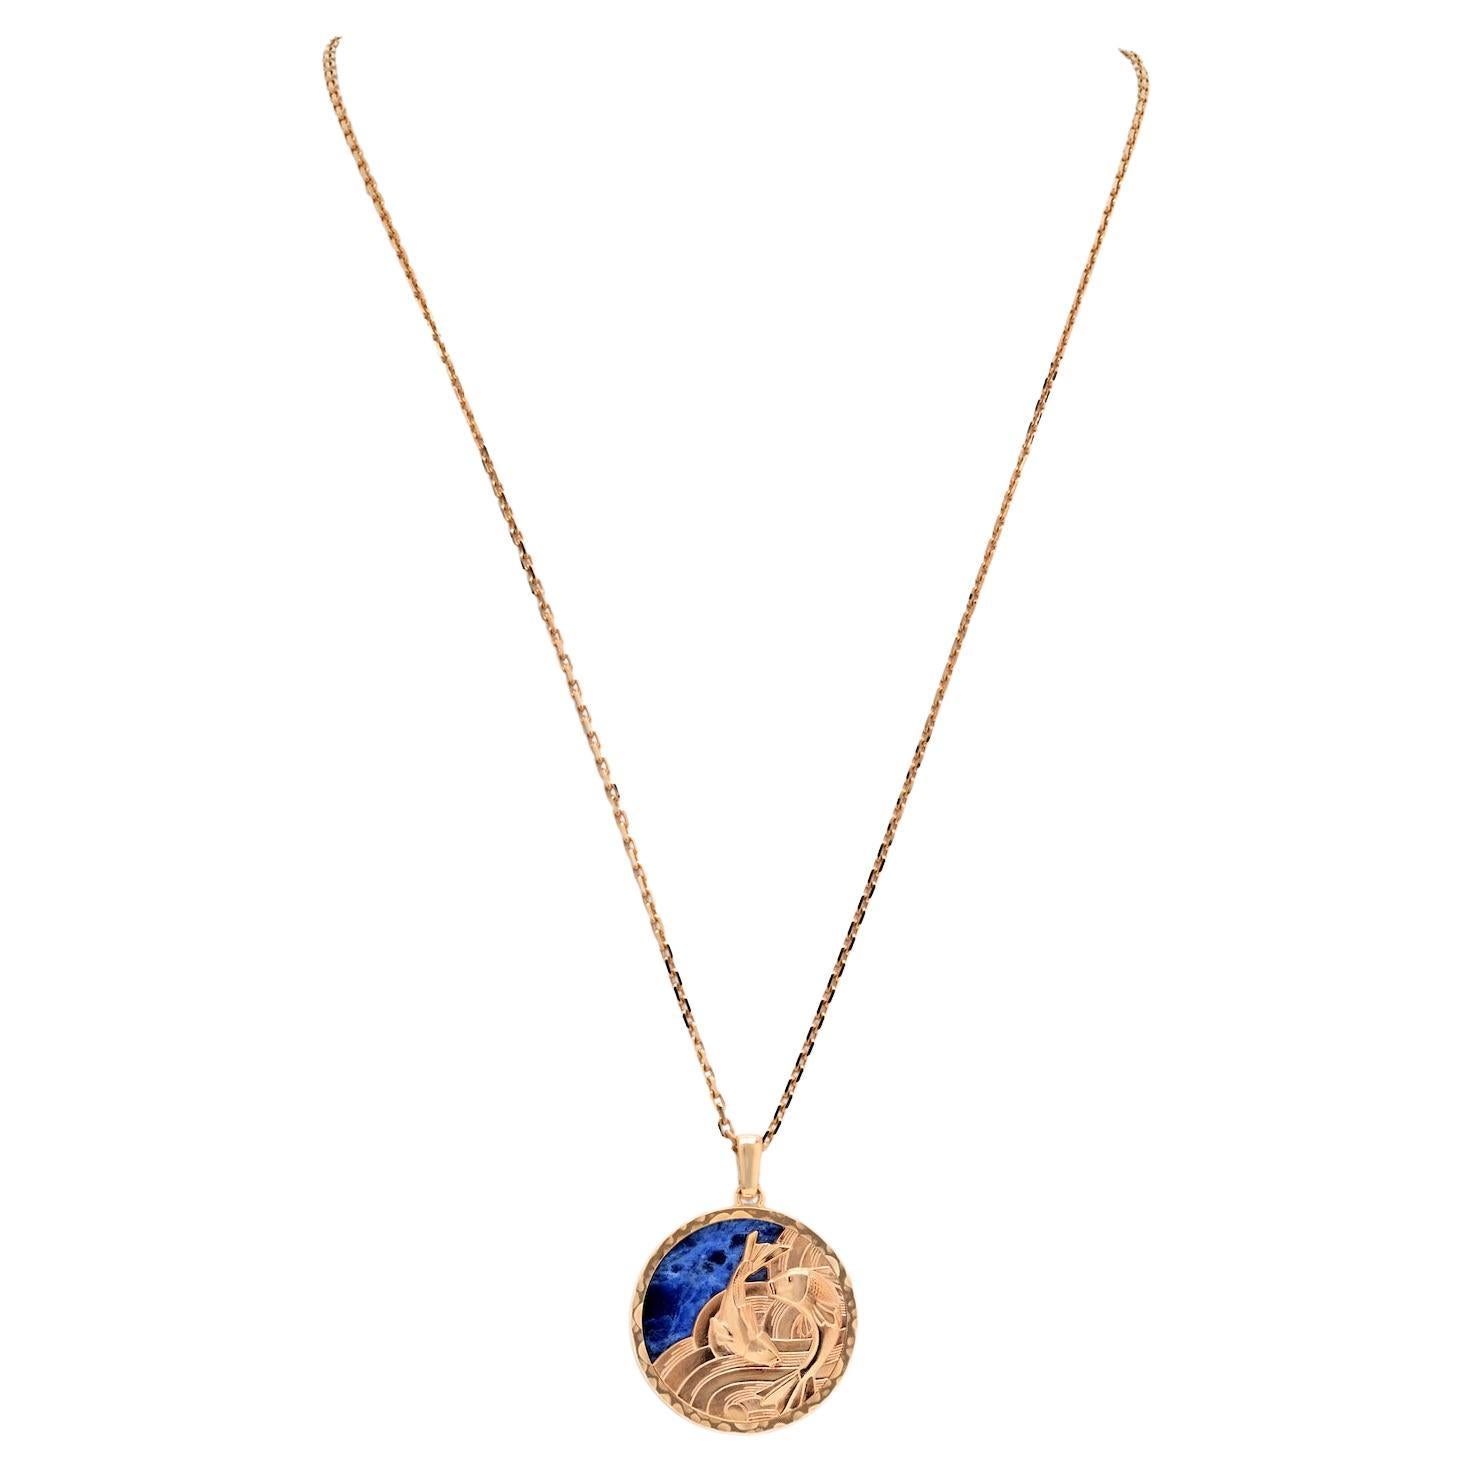 Enter the celestial realm with the contemporary Zodiaque long necklace, specifically the Piscium (Pisces) design by Van Cleef & Arpels. Crafted in 18K rose gold, this necklace is a mesmerizing blend of tradition and modern elegance, inspired by Van